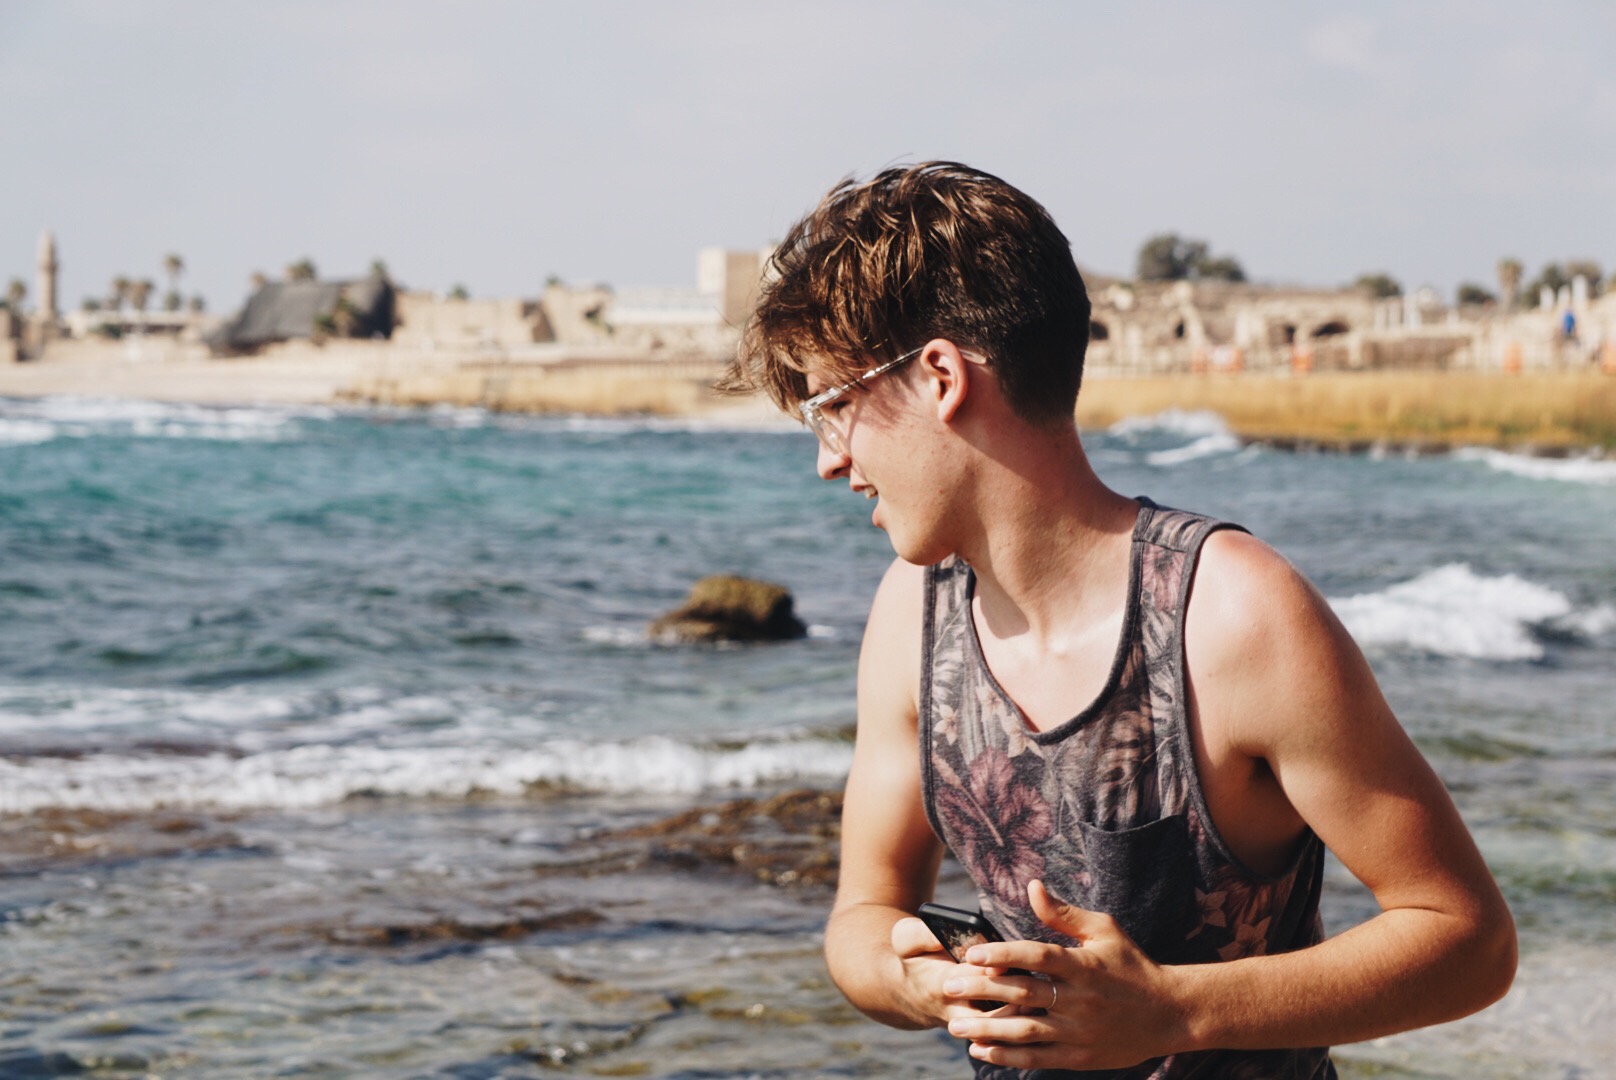   "Little Jewish Hipster"&nbsp; ft. Grant Geiger   Mediterranean Sea || Cesarea-By-The-Sea, Israel || July 2015 || Sony A6000  